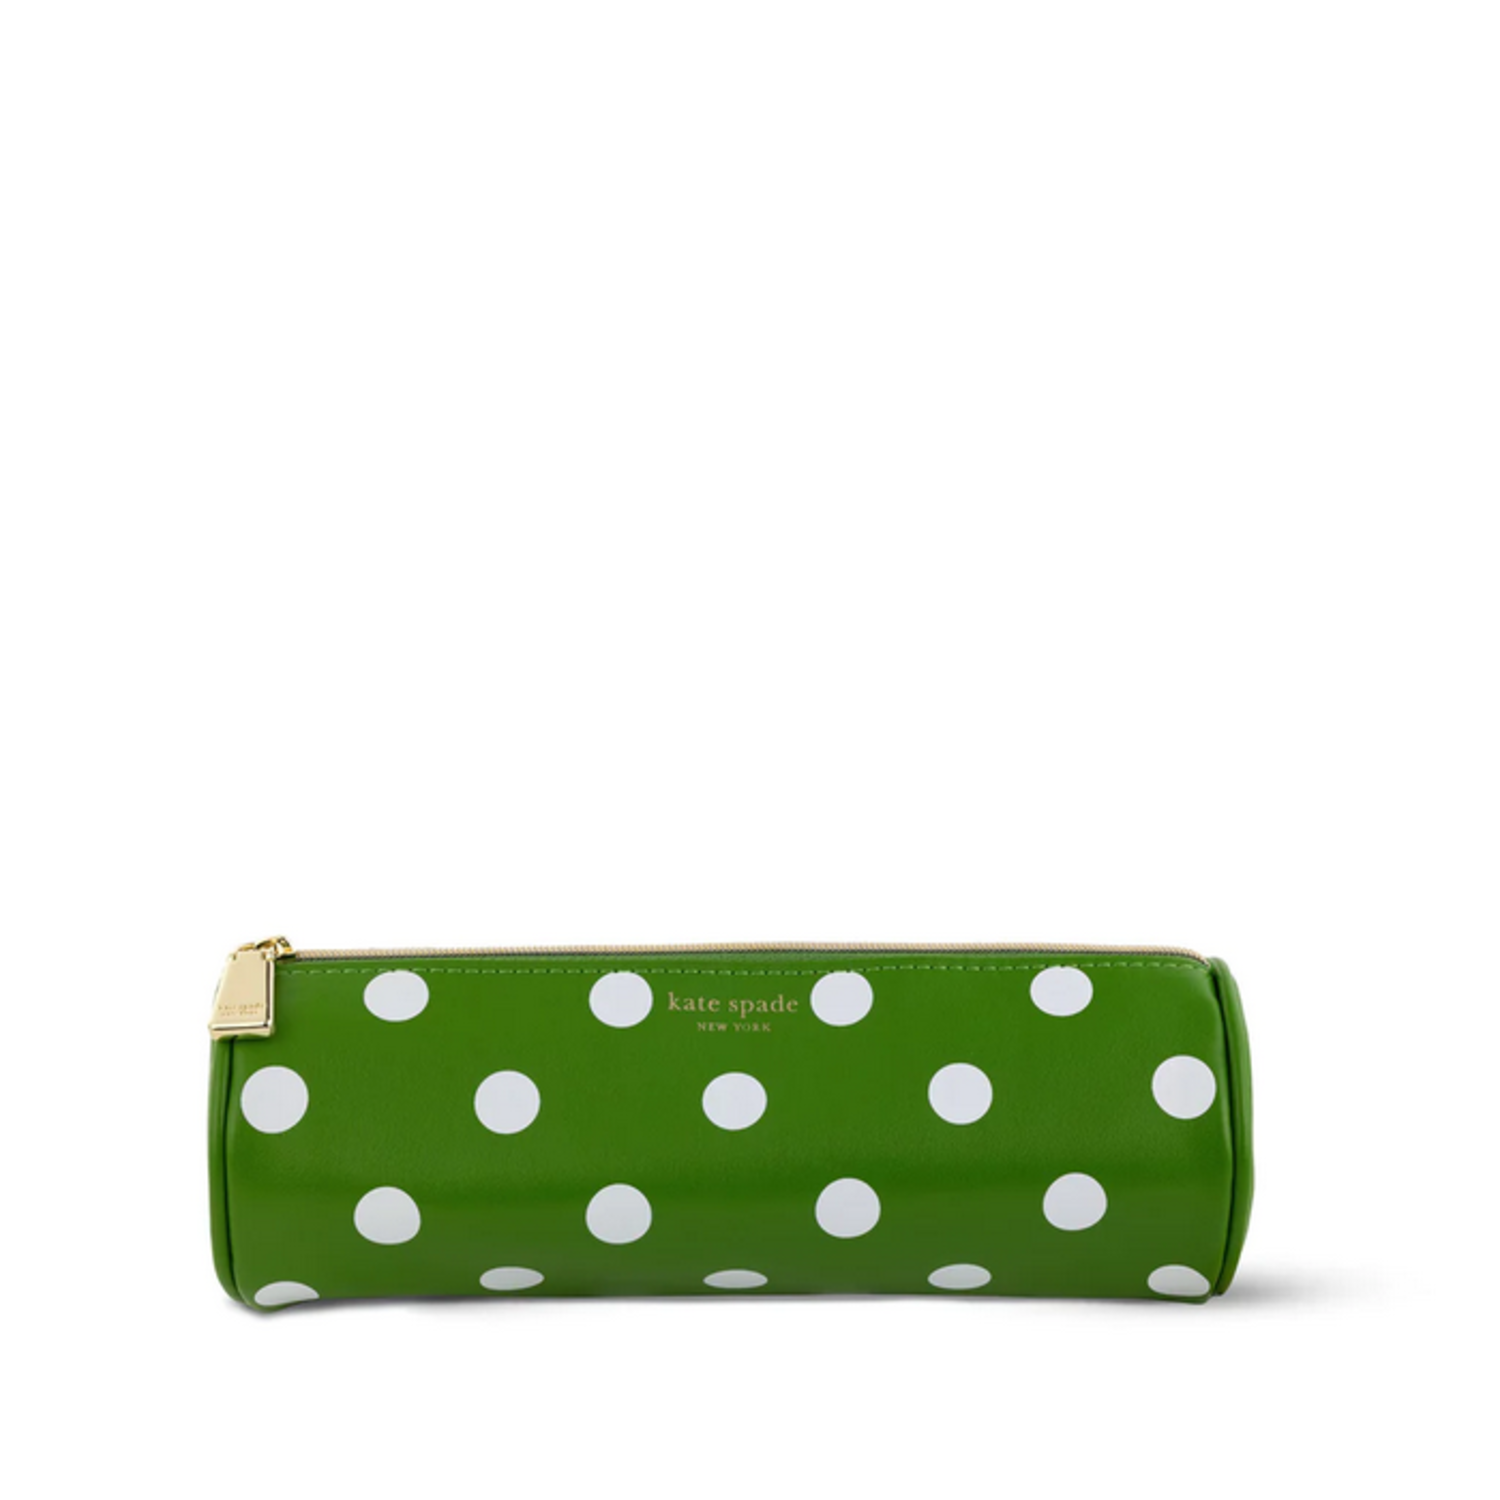 Kate Spade New York Pen and Pencil Case with School Supplies, Zip Pouch  Includes 2 Pencils, Sharpener, Eraser, and Ruler, Polka Dots (Black/White)